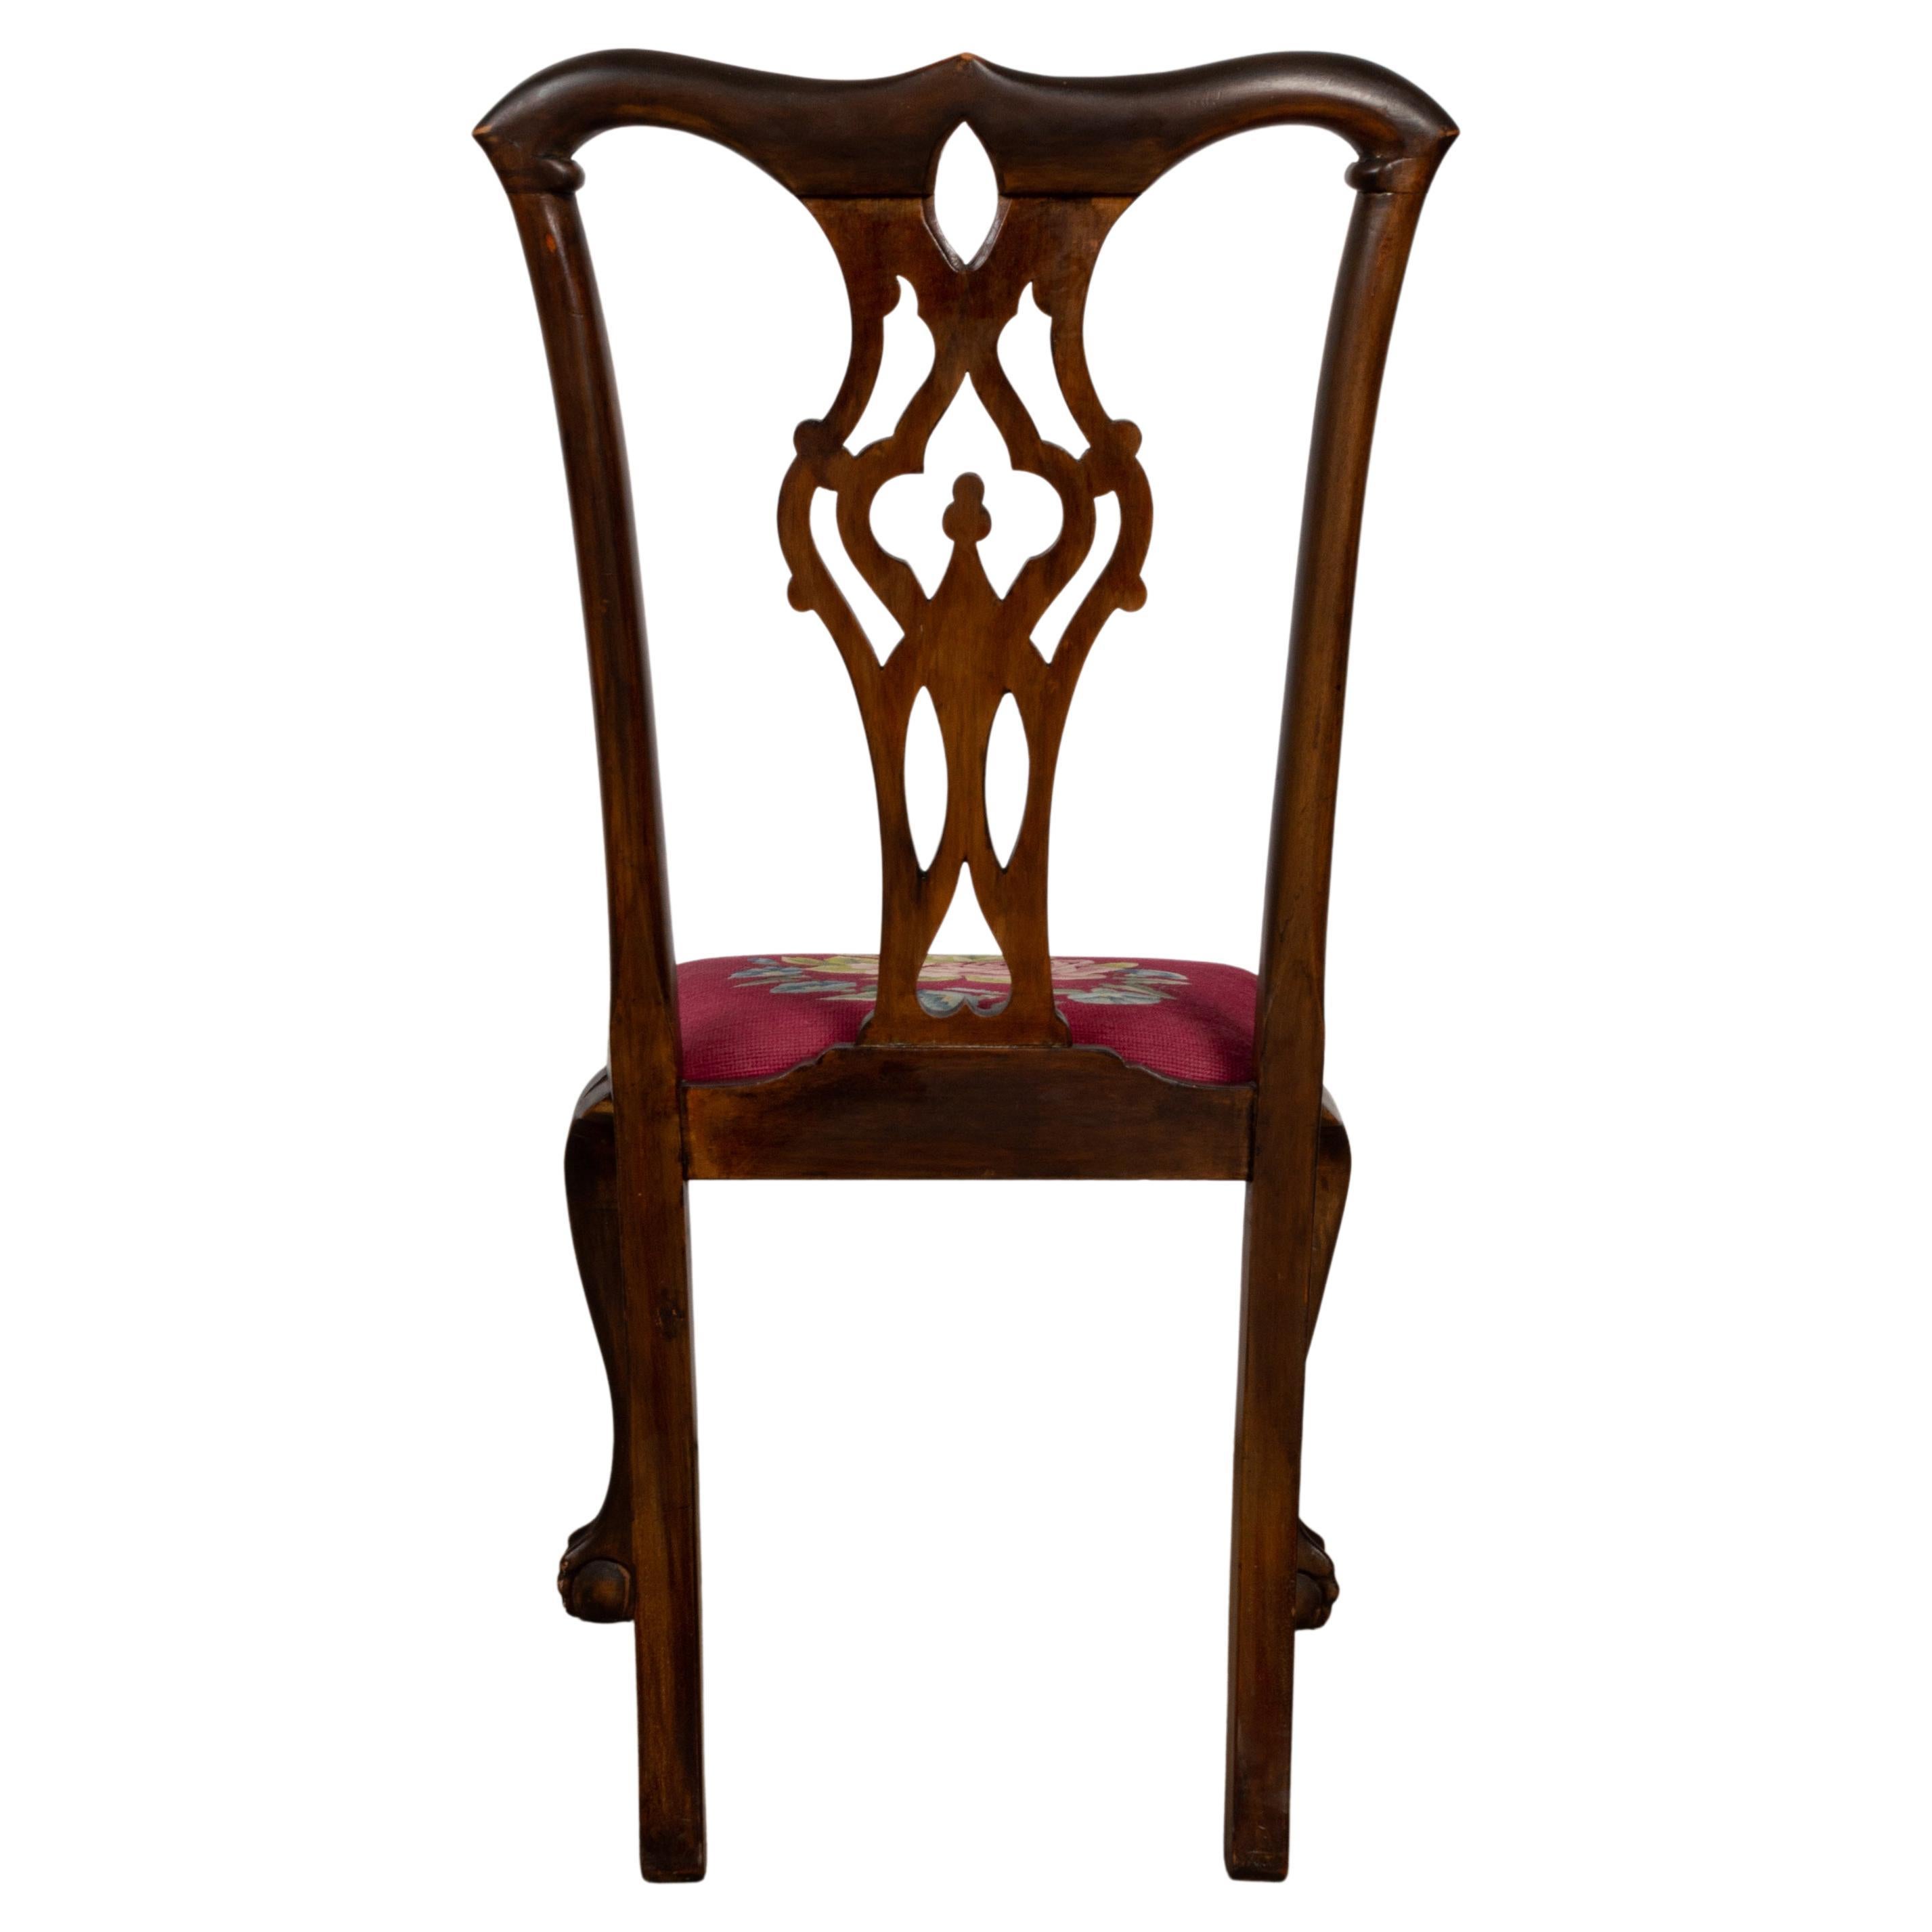 4 Antique English 19th Century Chippendale Revival Mahogany Chairs For Sale 9